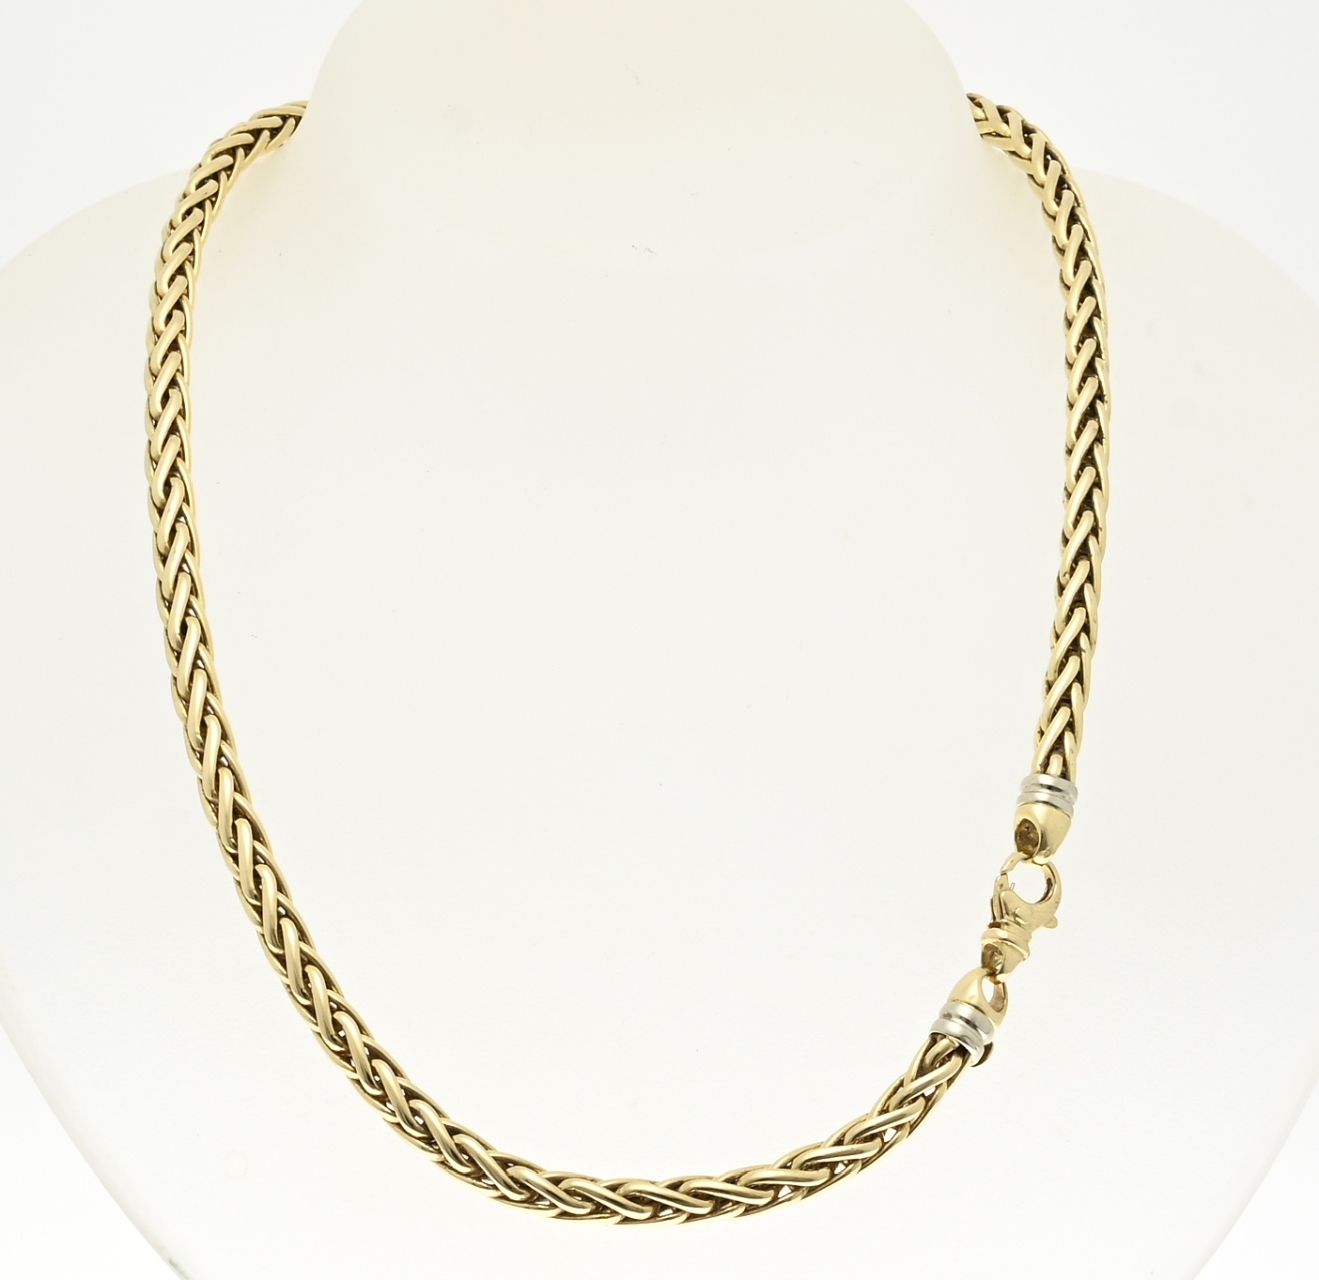 Gold foxtail necklace